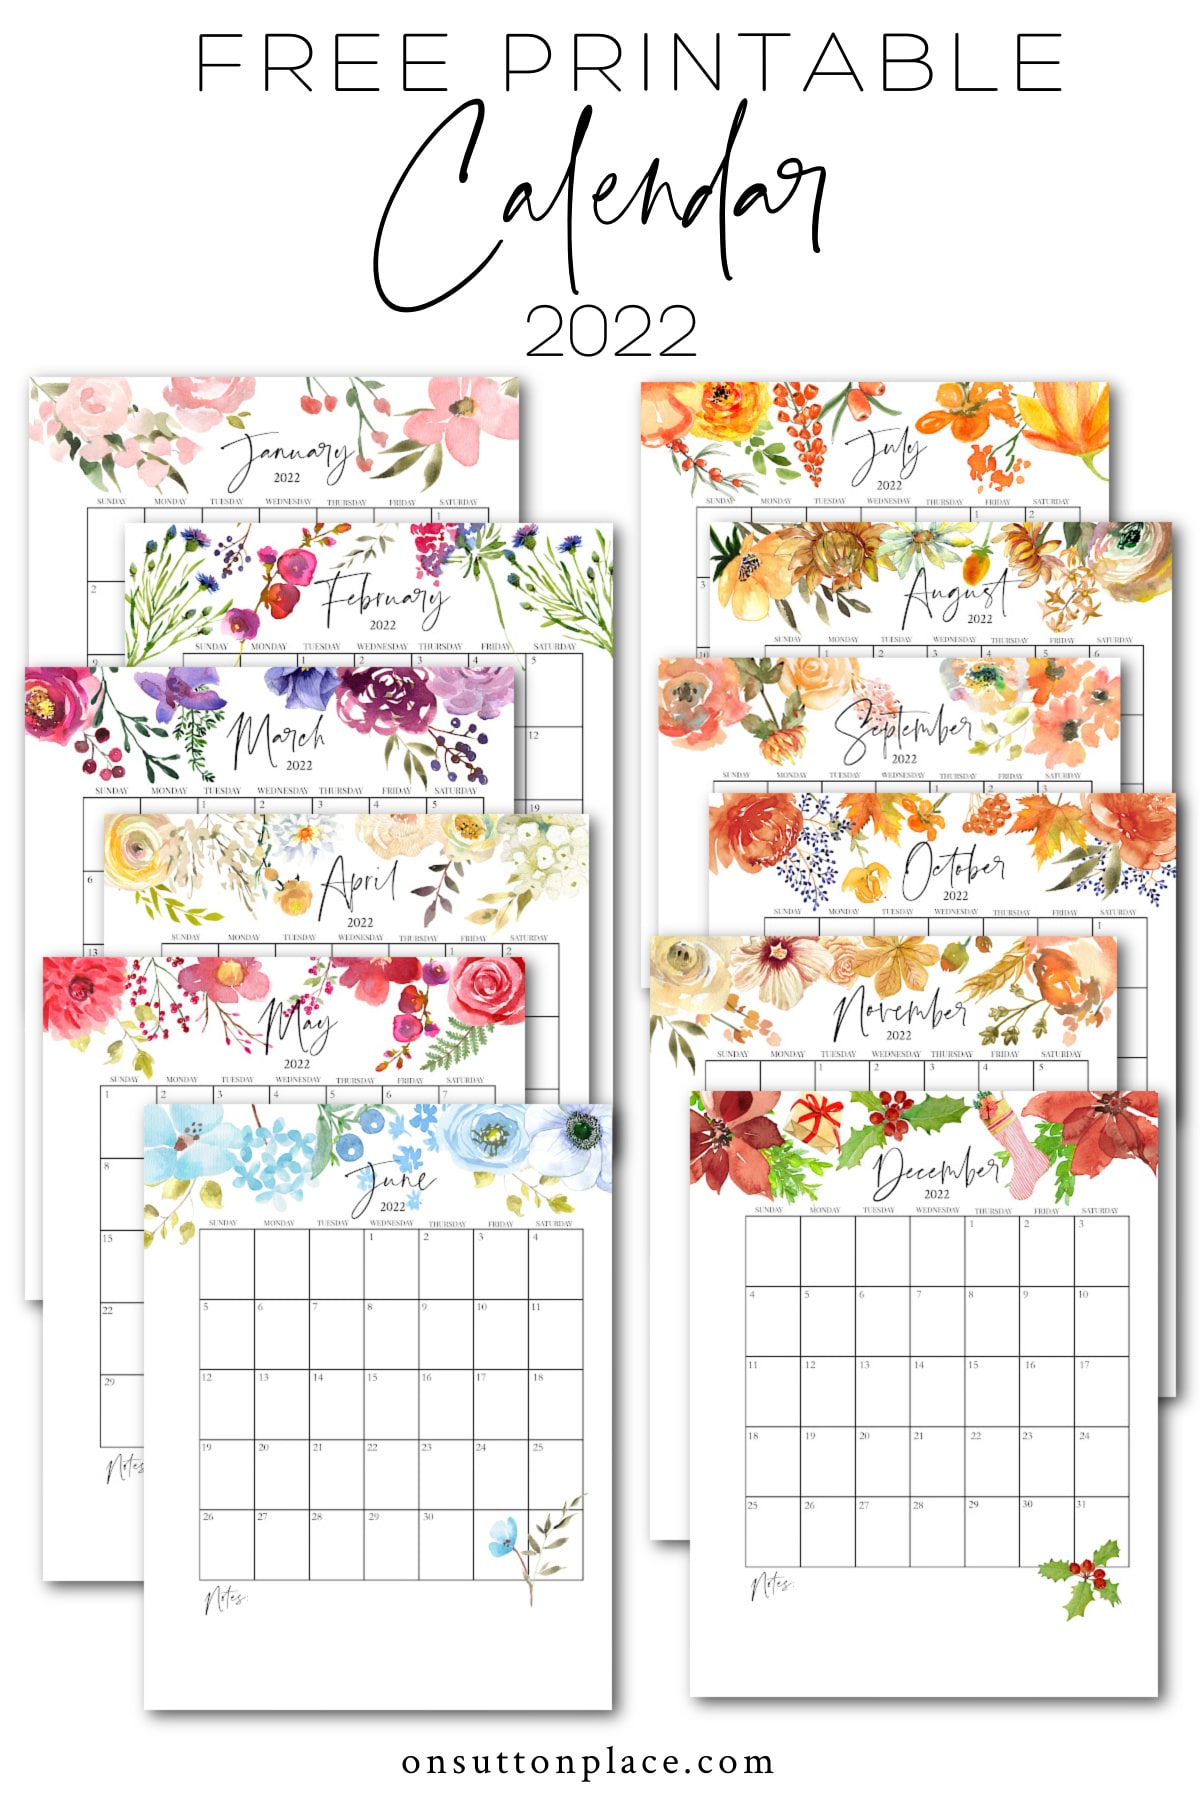 50+ of the Best 2022 Free Printable Calendars